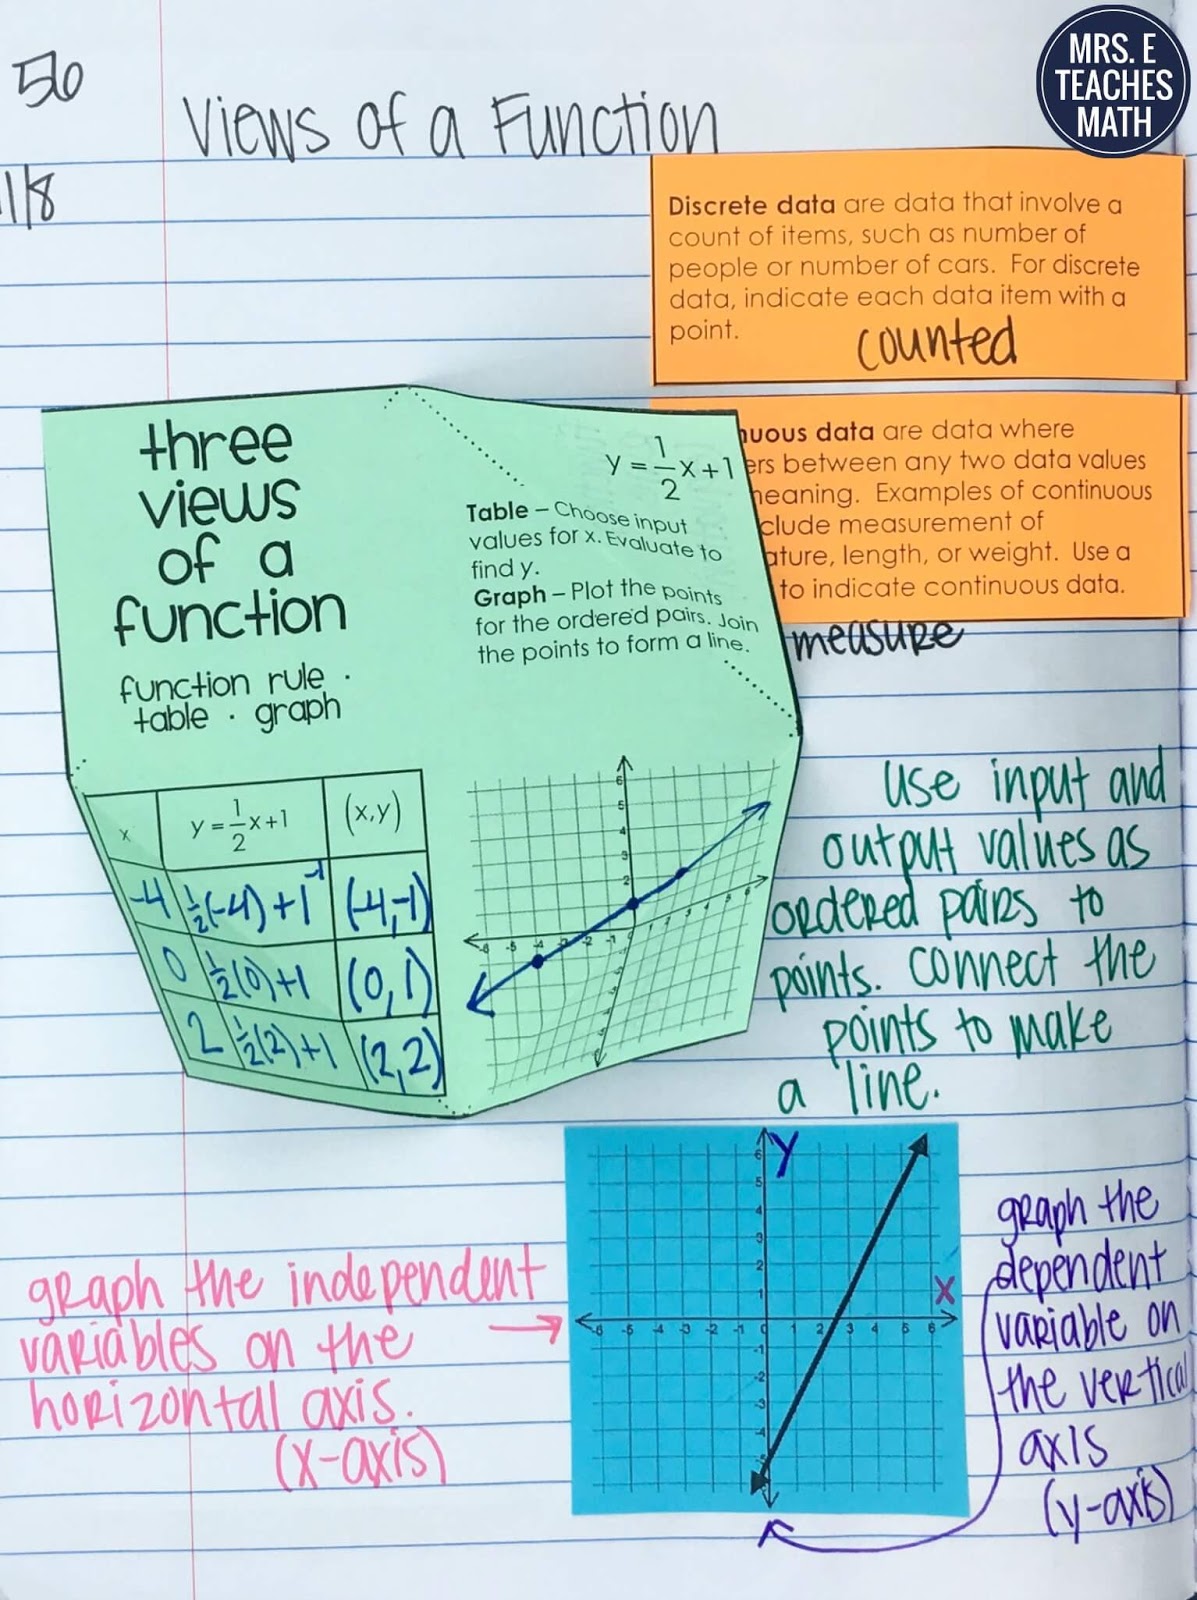 Functions, Tables, and Graphs INB Pages | Mrs. E Teaches Math